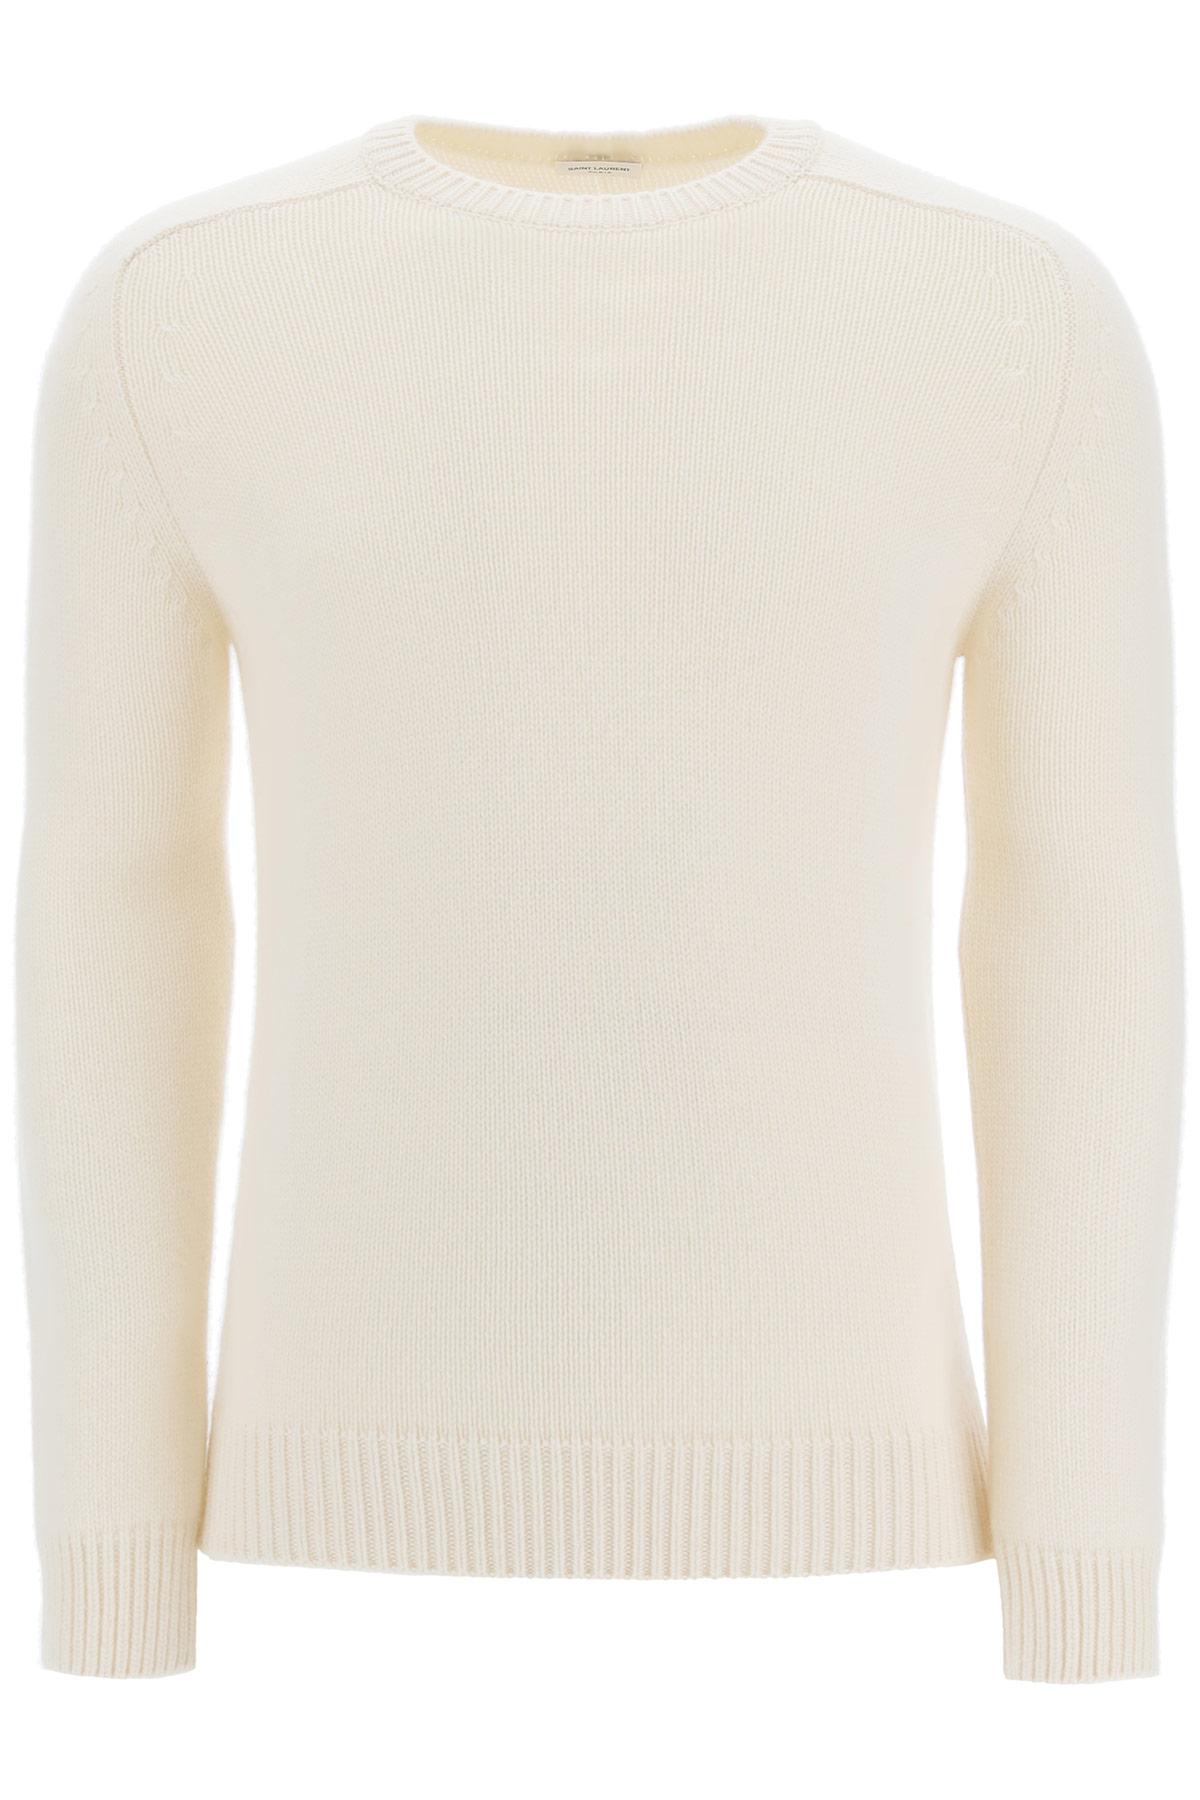 Saint Laurent Cashmere Sweater in White for Men - Lyst